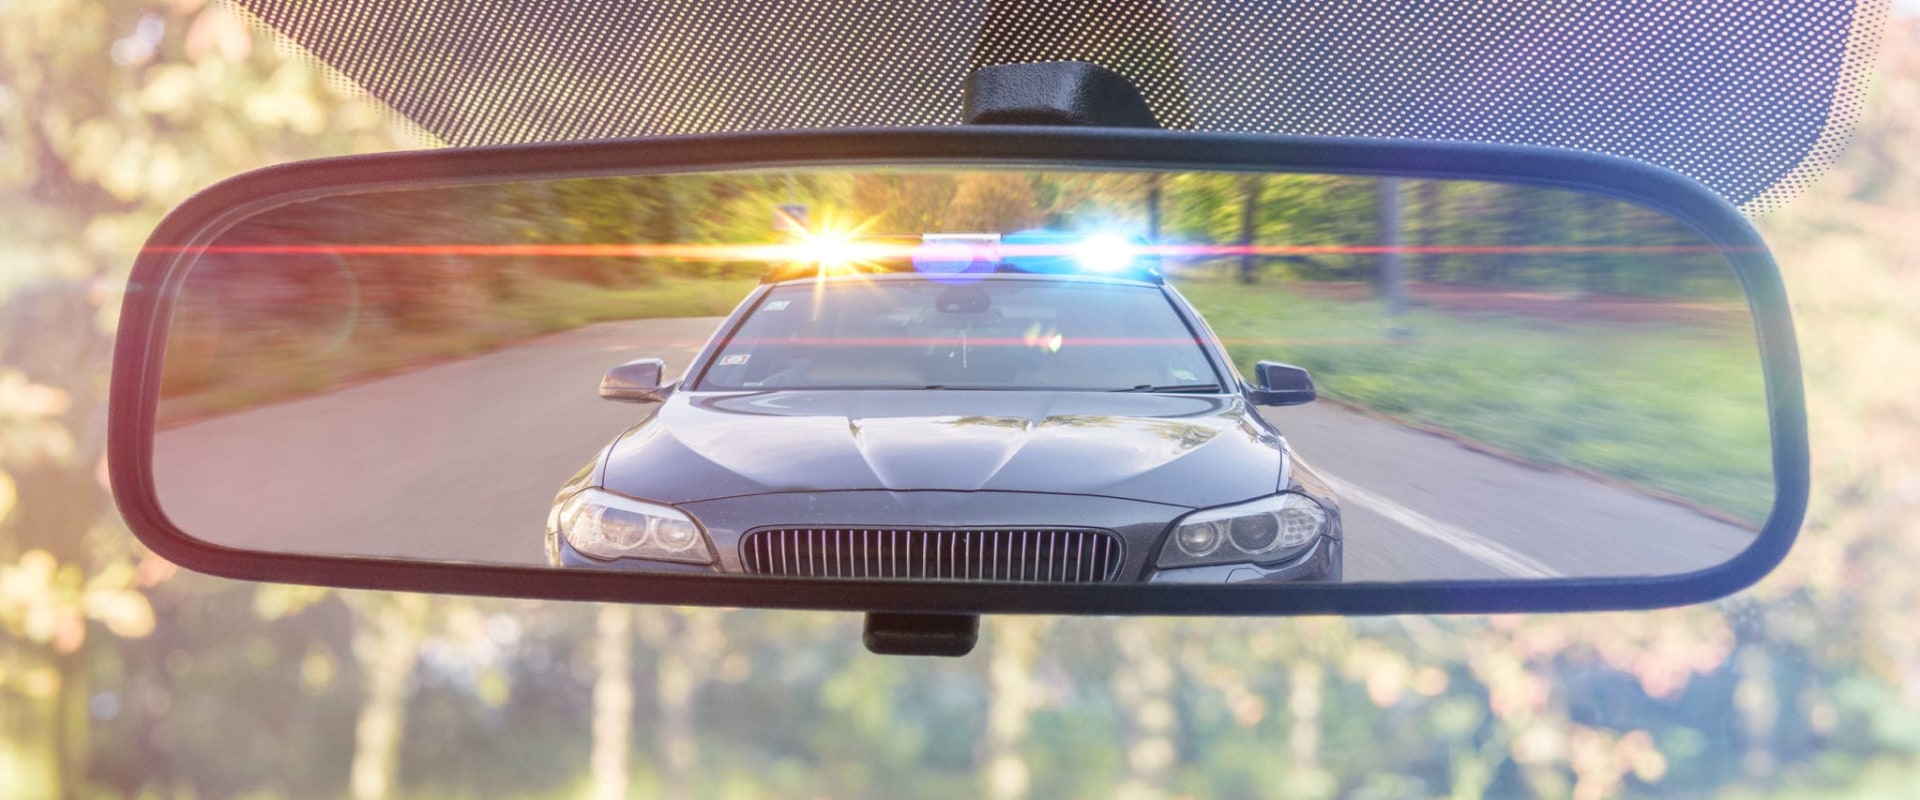 What To Do If You're Arrested For DUI Or DWI In Dallas